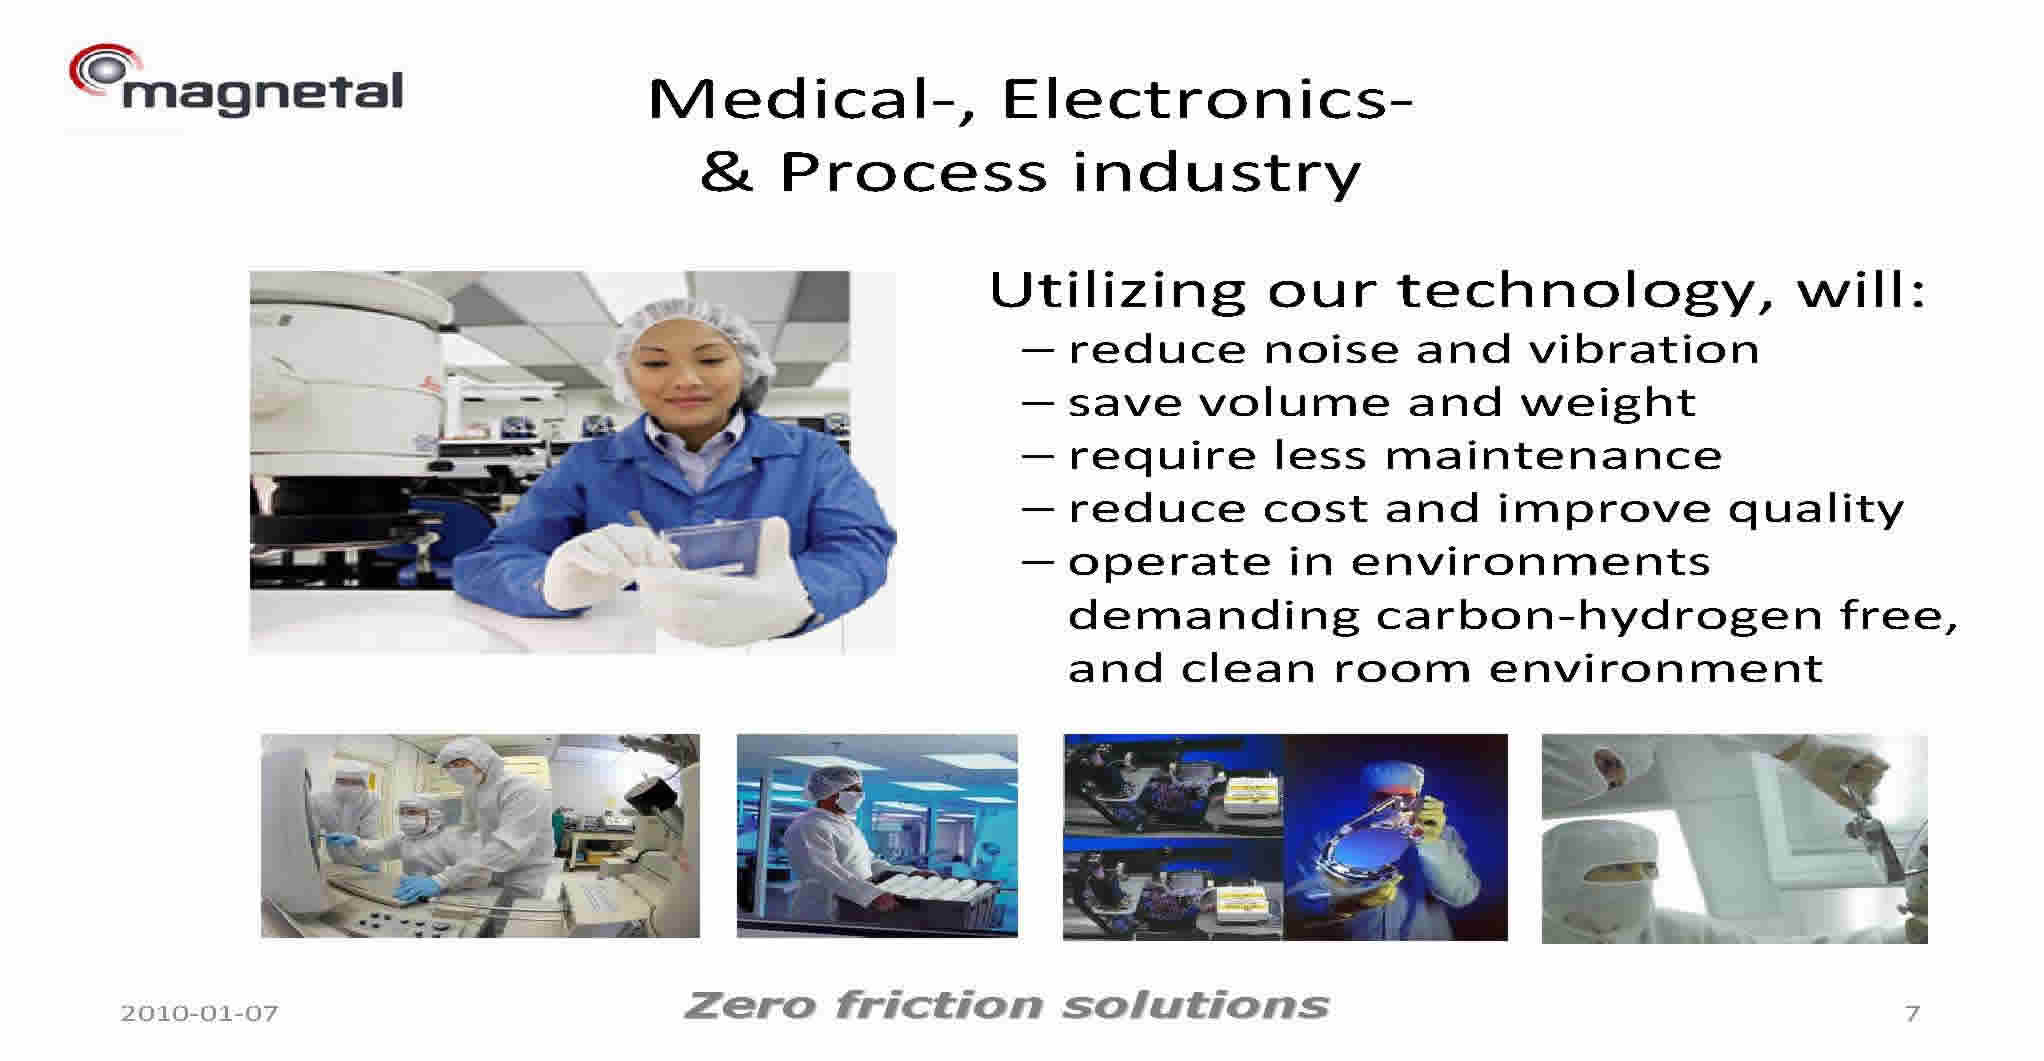 Adding Value to Medical adn Process Industry by Using Magnetal Homopolar Electrodynamic Bearings